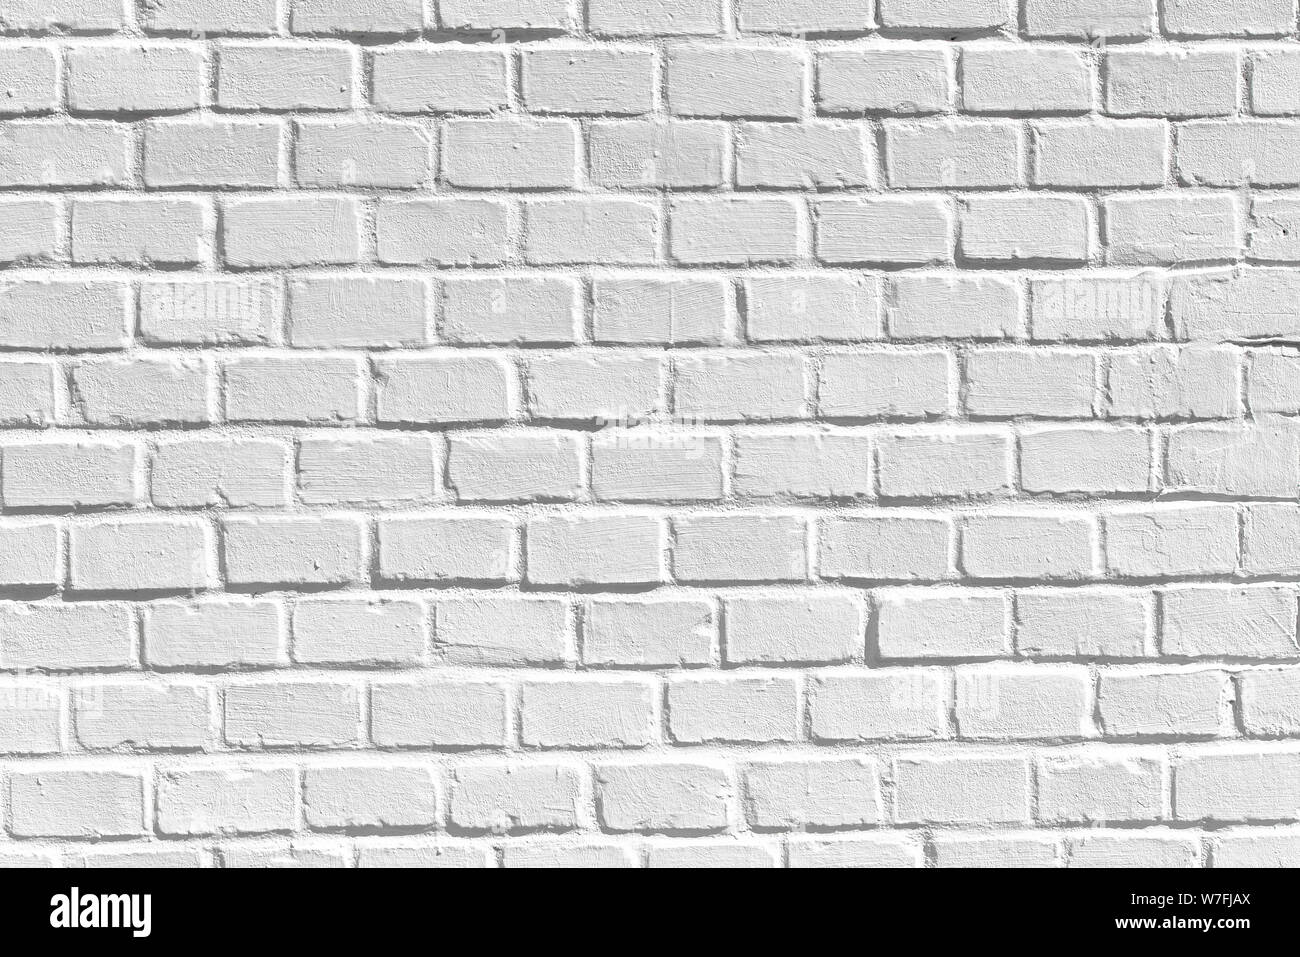 White Clean Brick Wall As Texture Background Or Backdrop High Resolution Picture Stock Photo Alamy